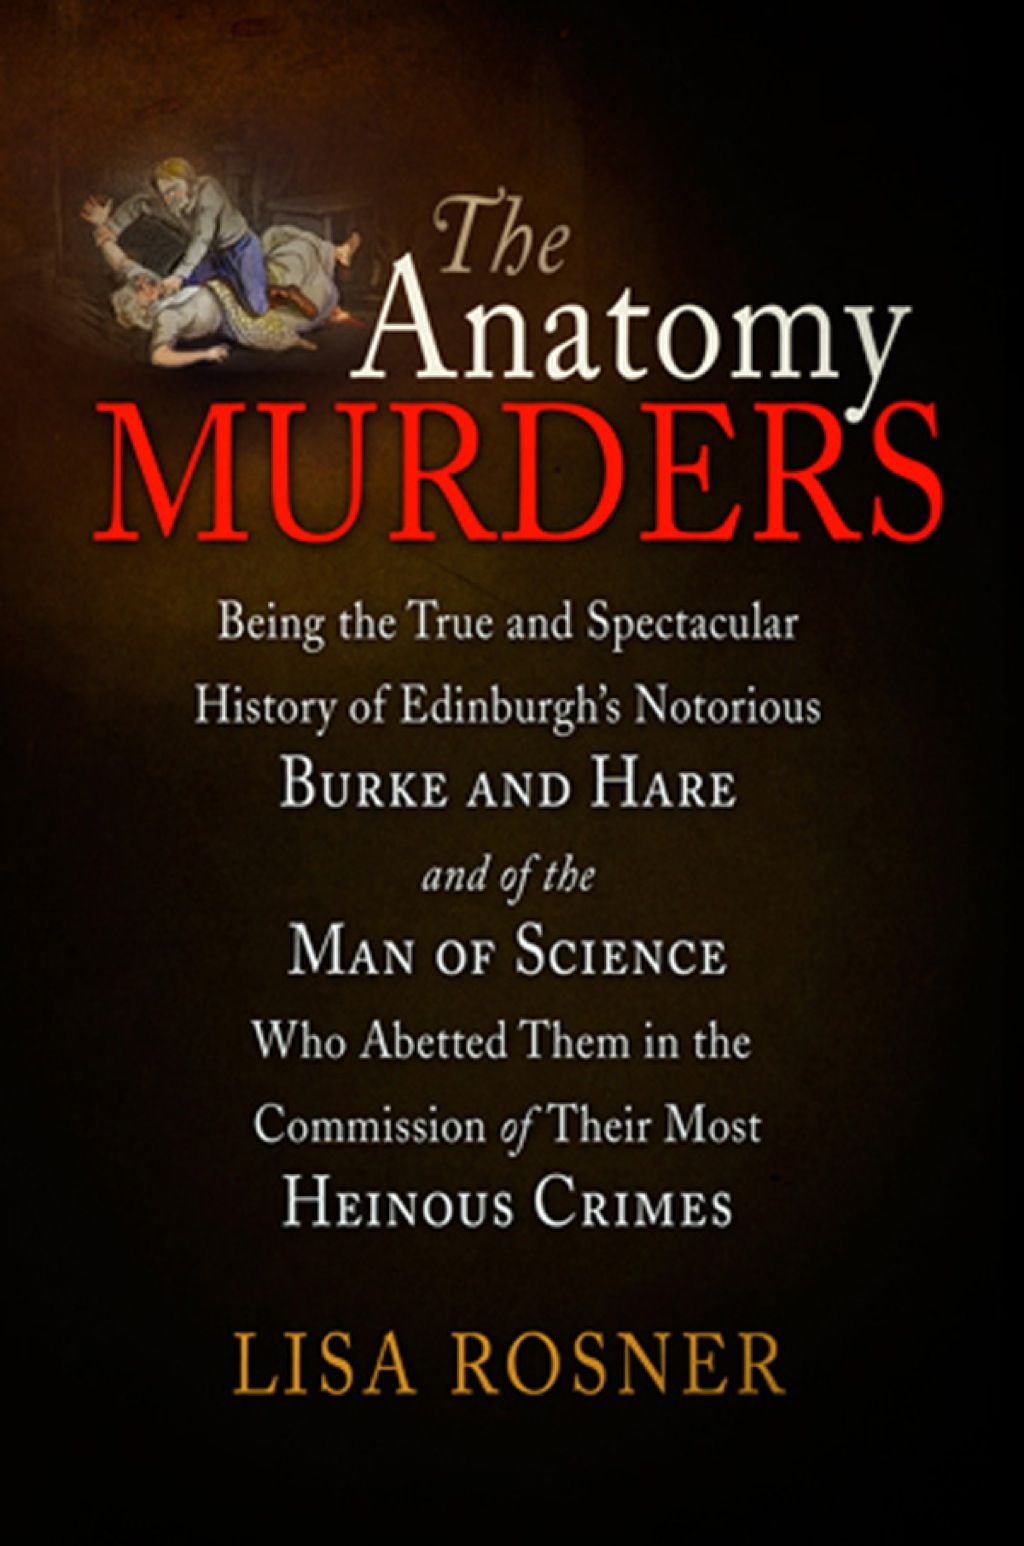 Cover of The Anatomy Murders by Lisa Rosner